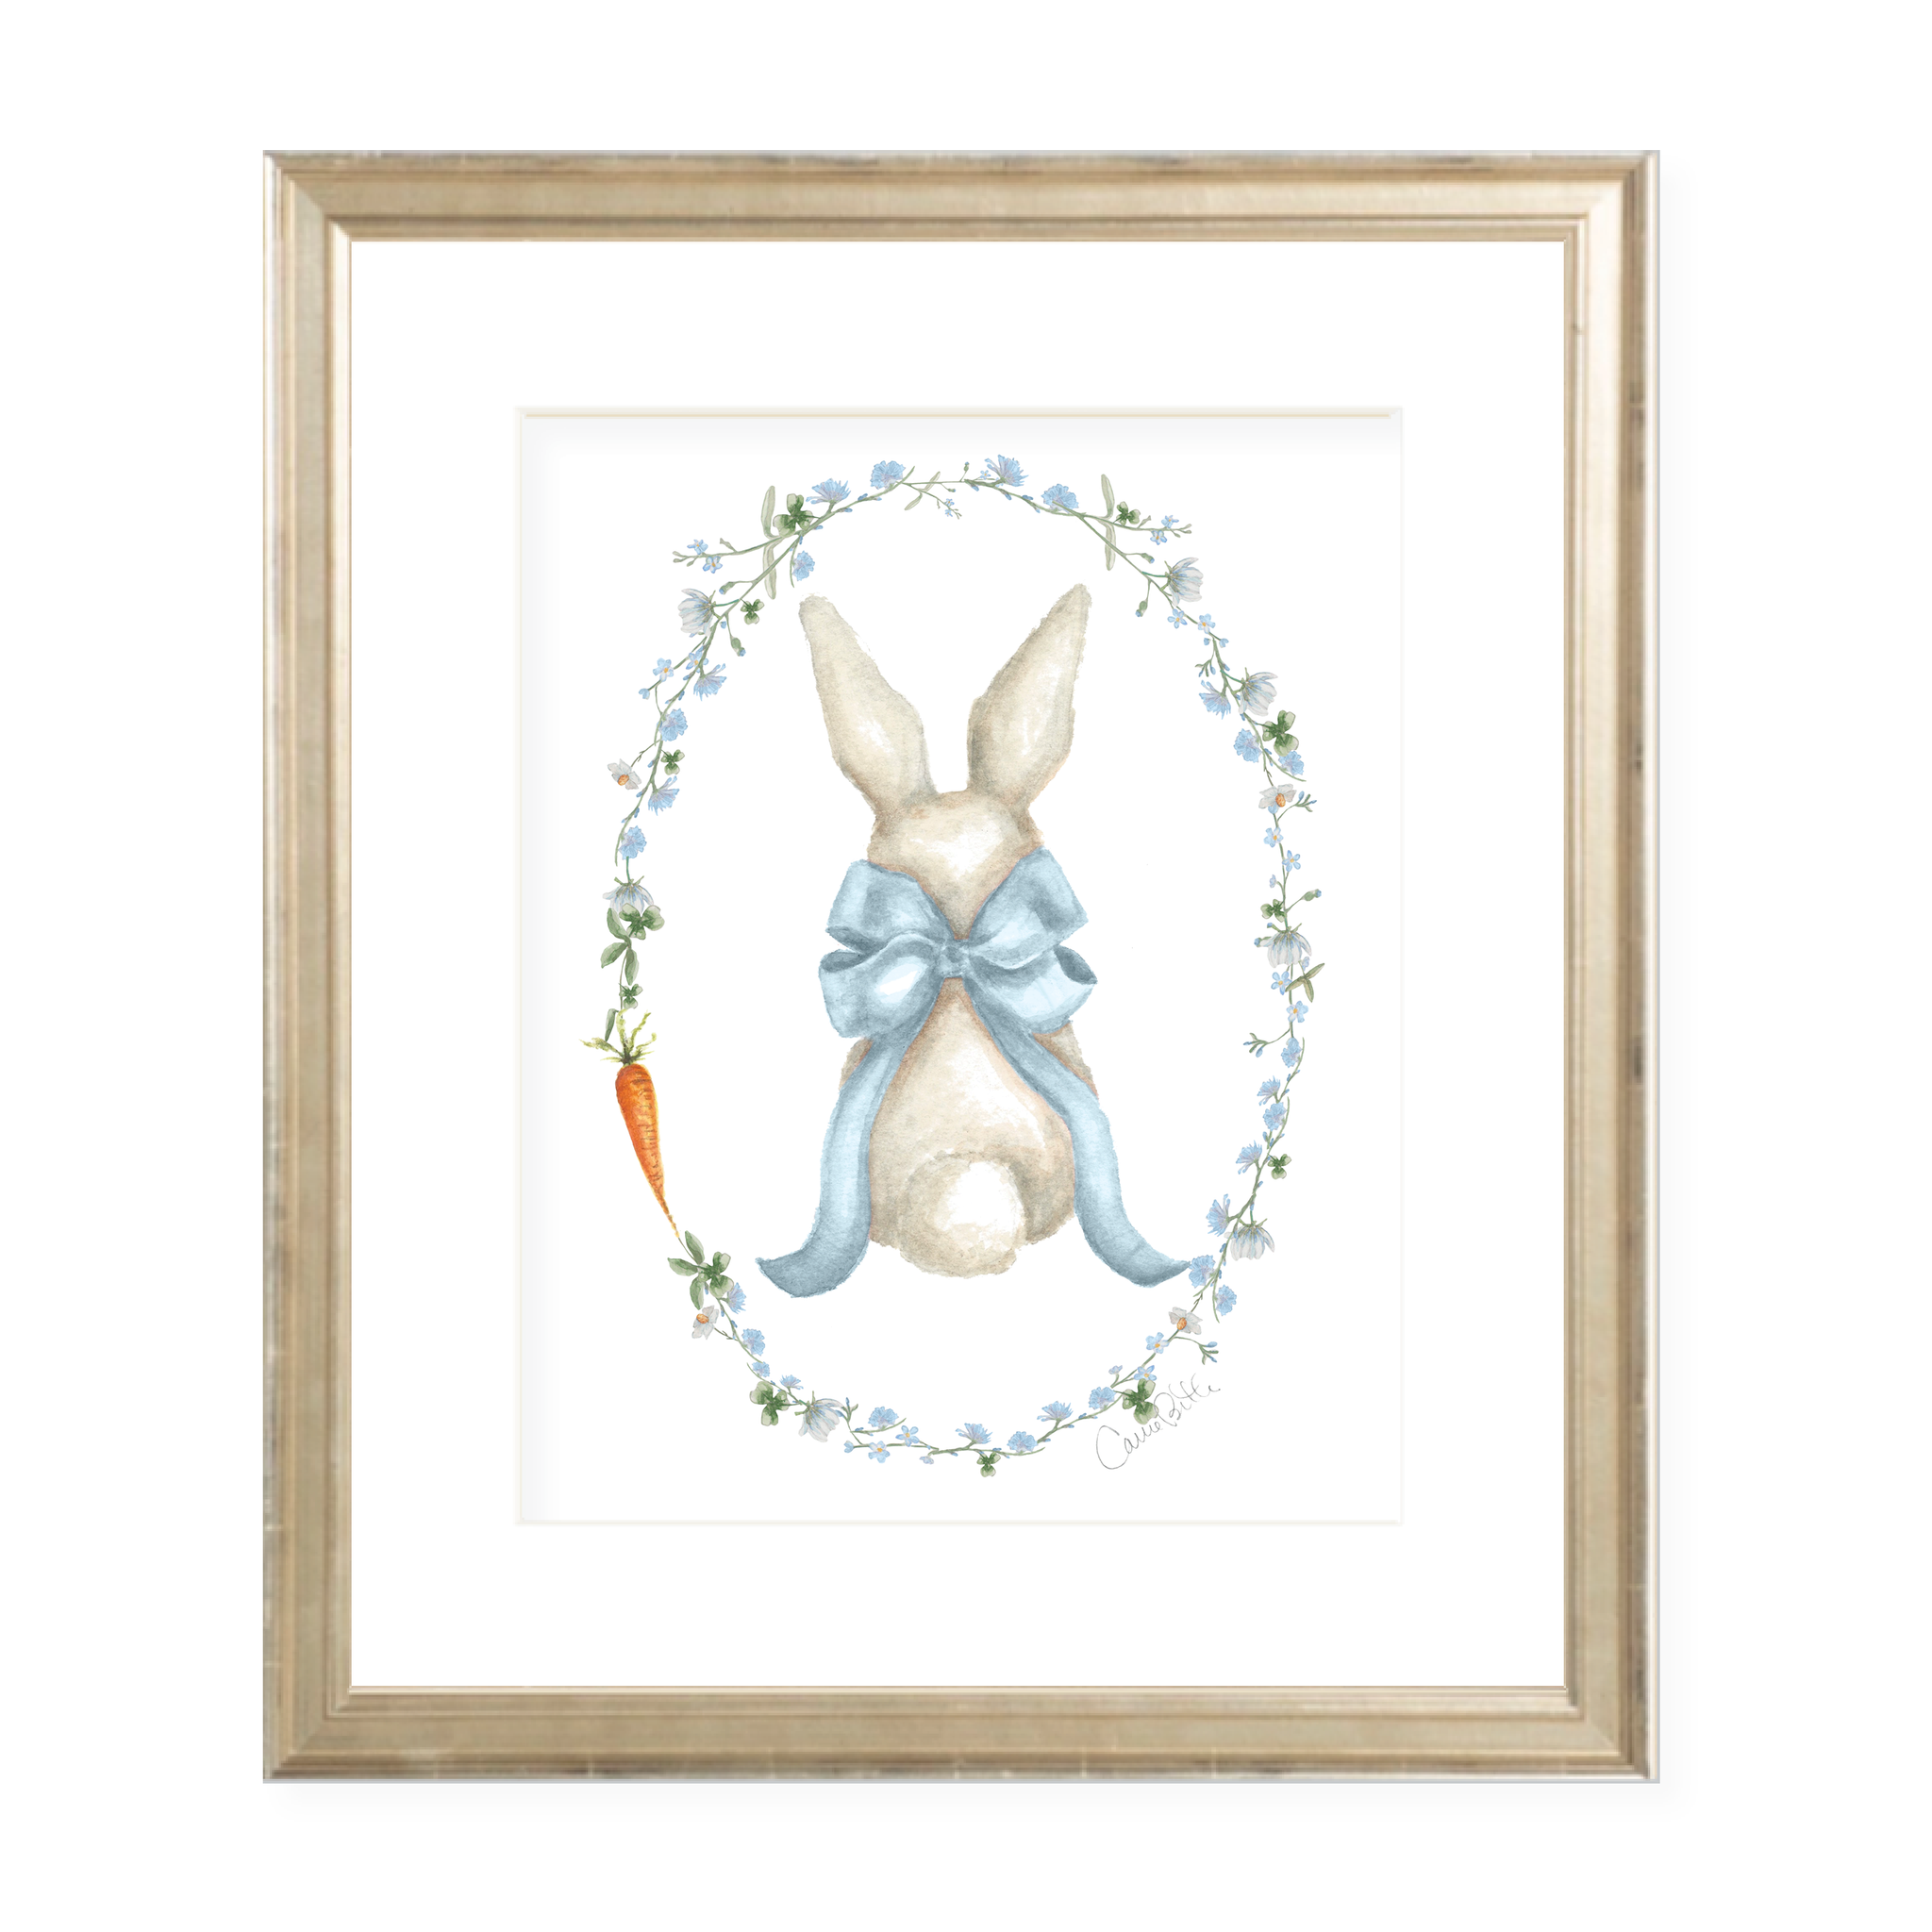 Bunny and Bow Blue Wreath Watercolor Print